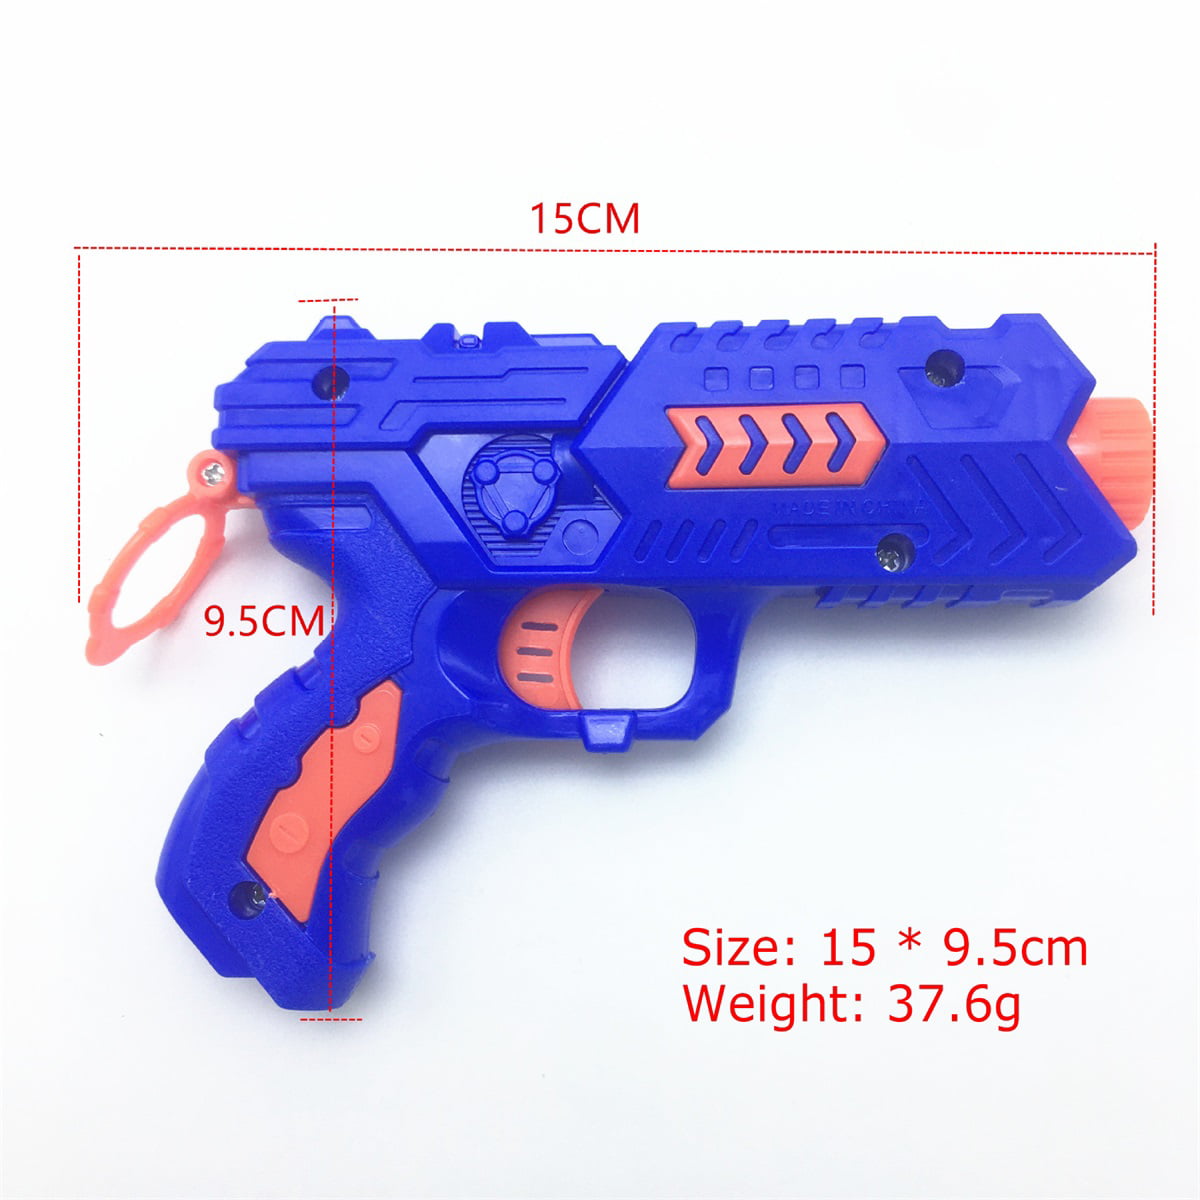 Auto-Reset Toy Gun Electric Score Target Game for Nerf Electric Targets 